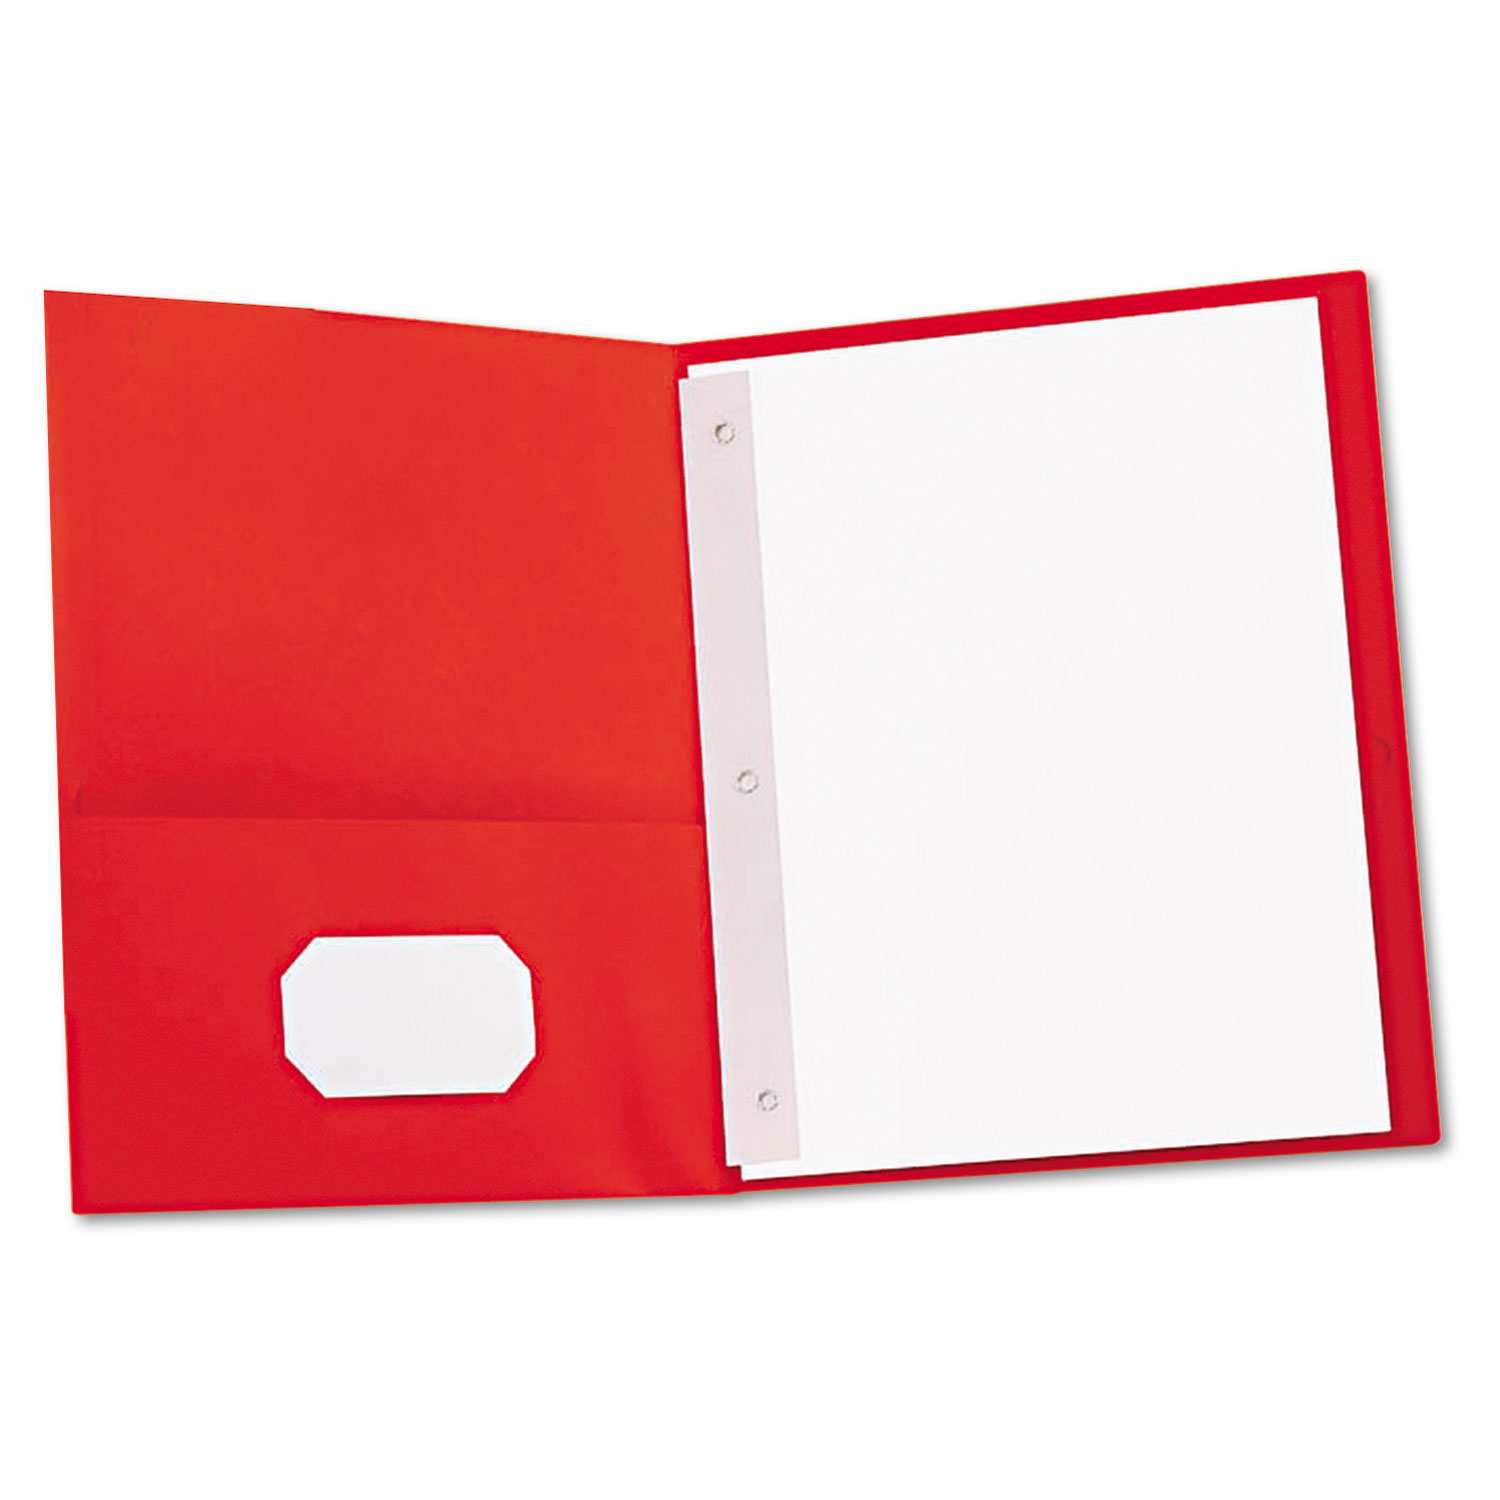  Universal UNV57118 Two-Pocket Portfolios with Tang Fasteners, 11 x 8 1/2, Red, 25/Box (UNV57118) 